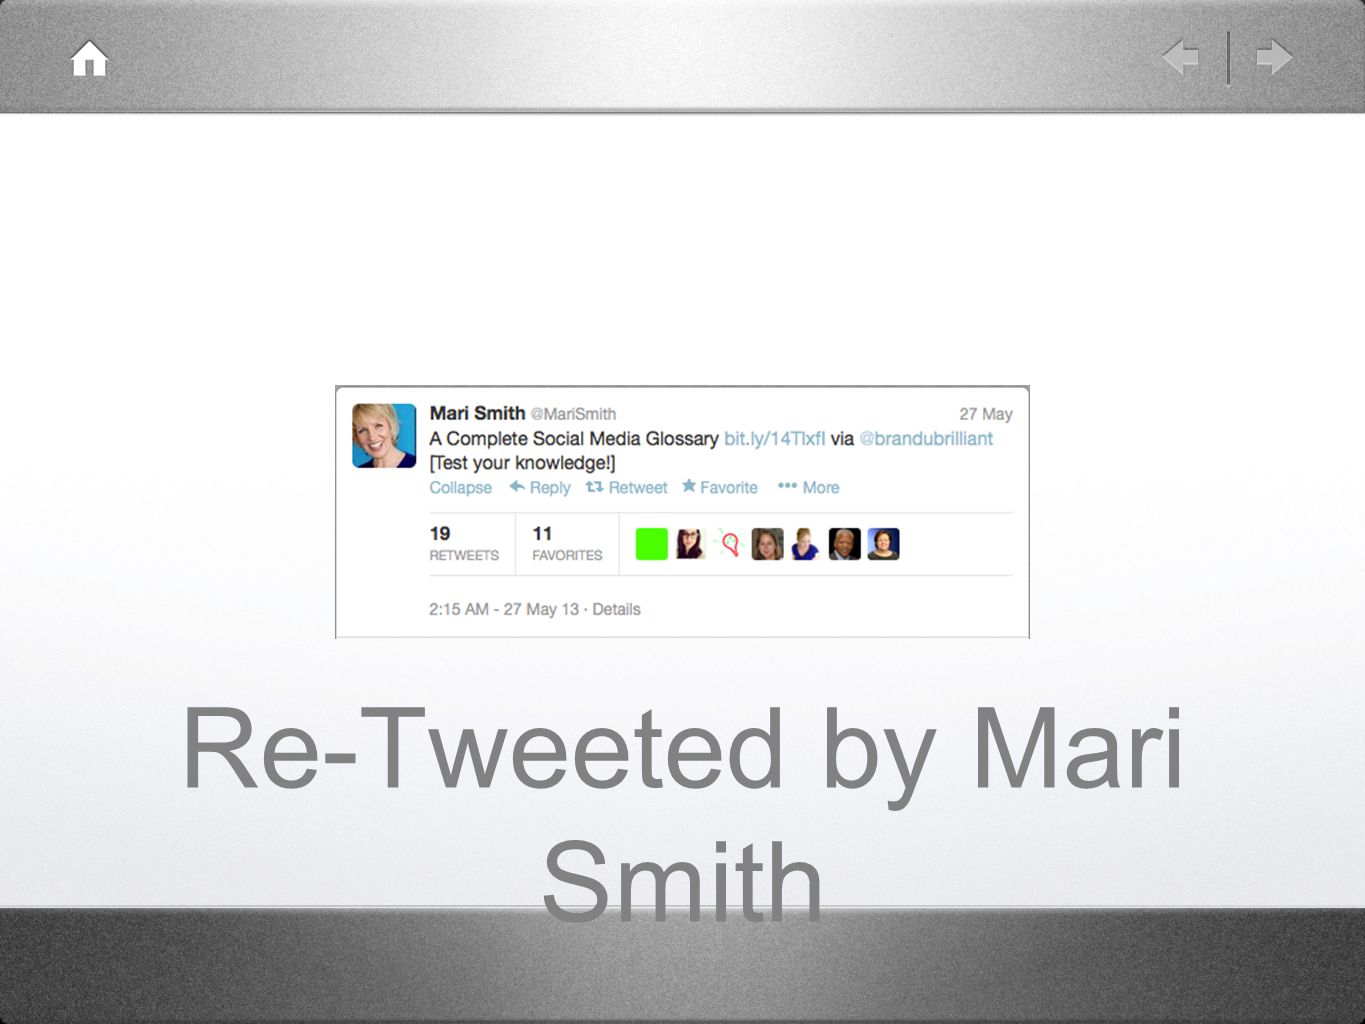 Re-Tweeted by Mari Smith